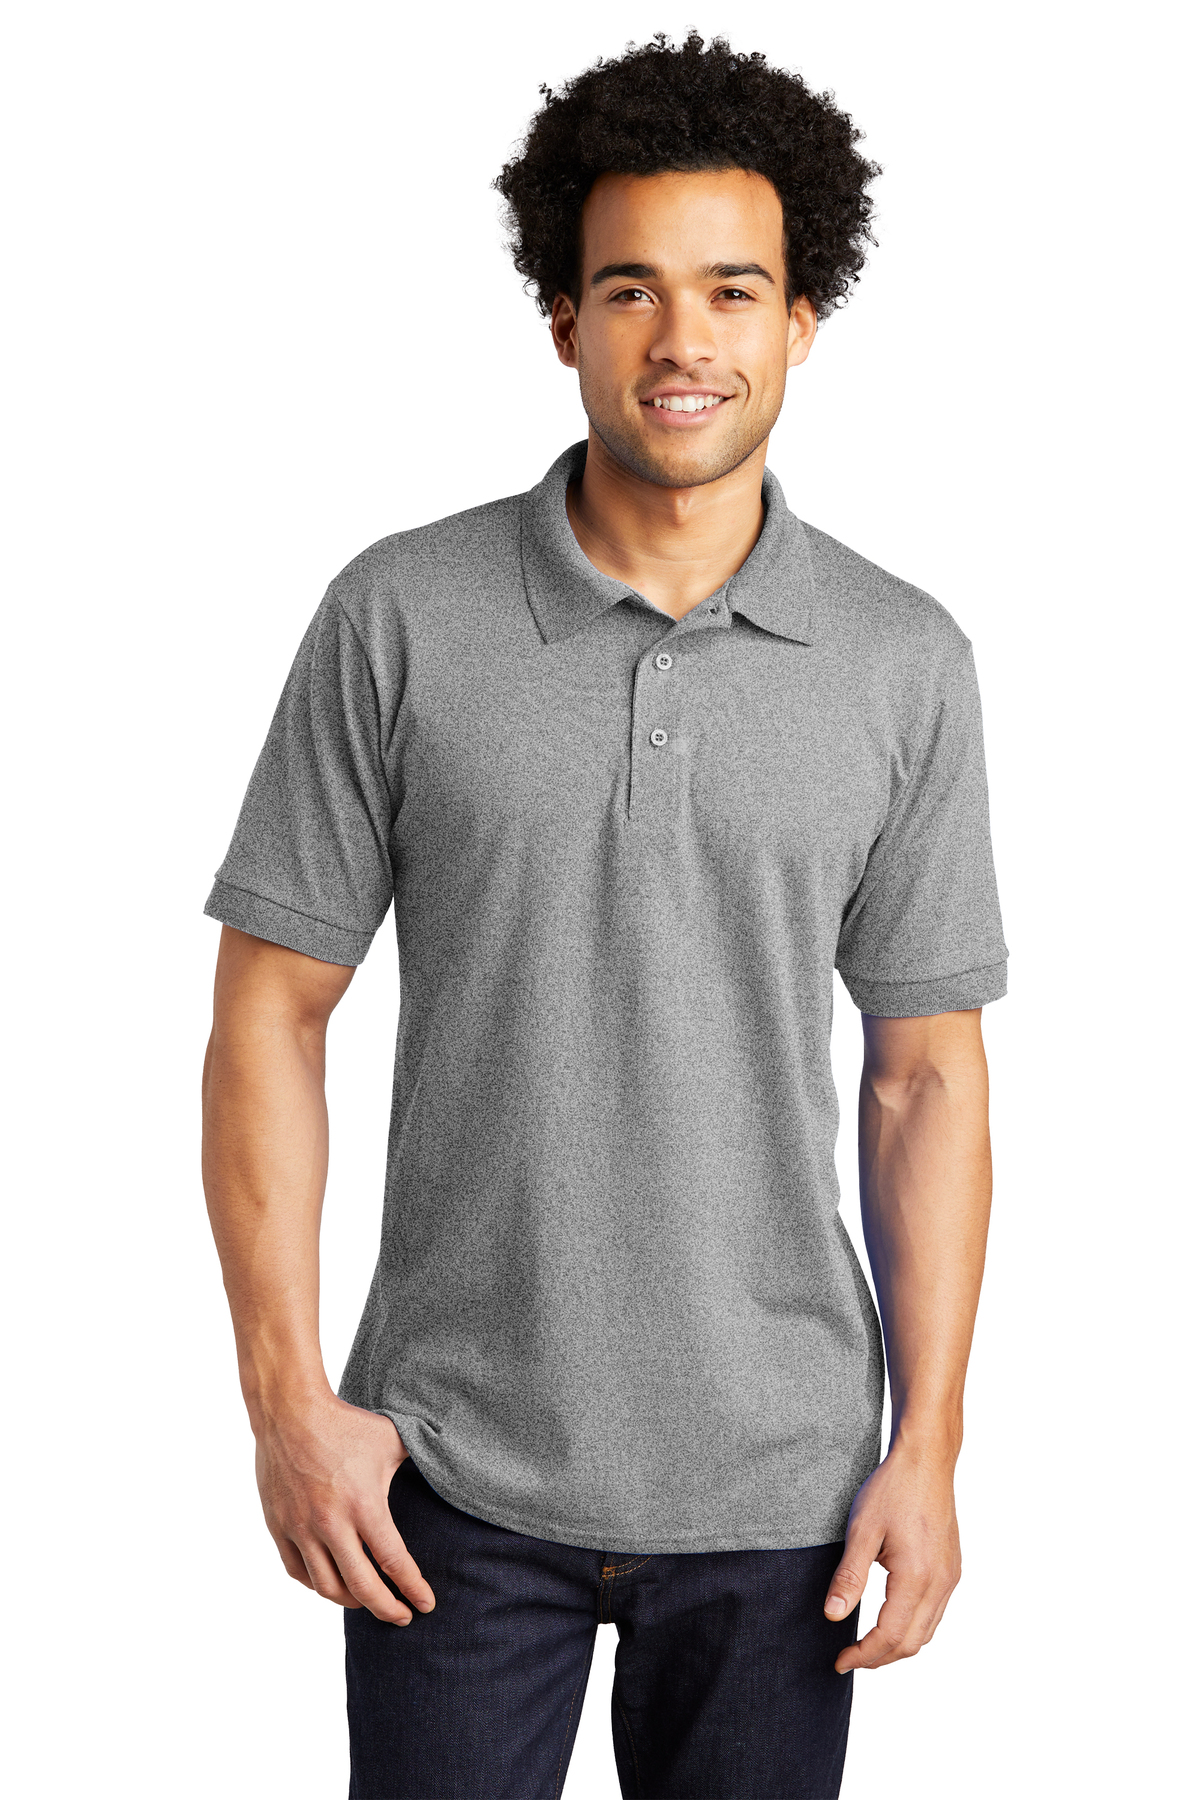 Port Company Tall 5 5 Ounce Jersey Knit Polo Kp55T Athletic Heather 